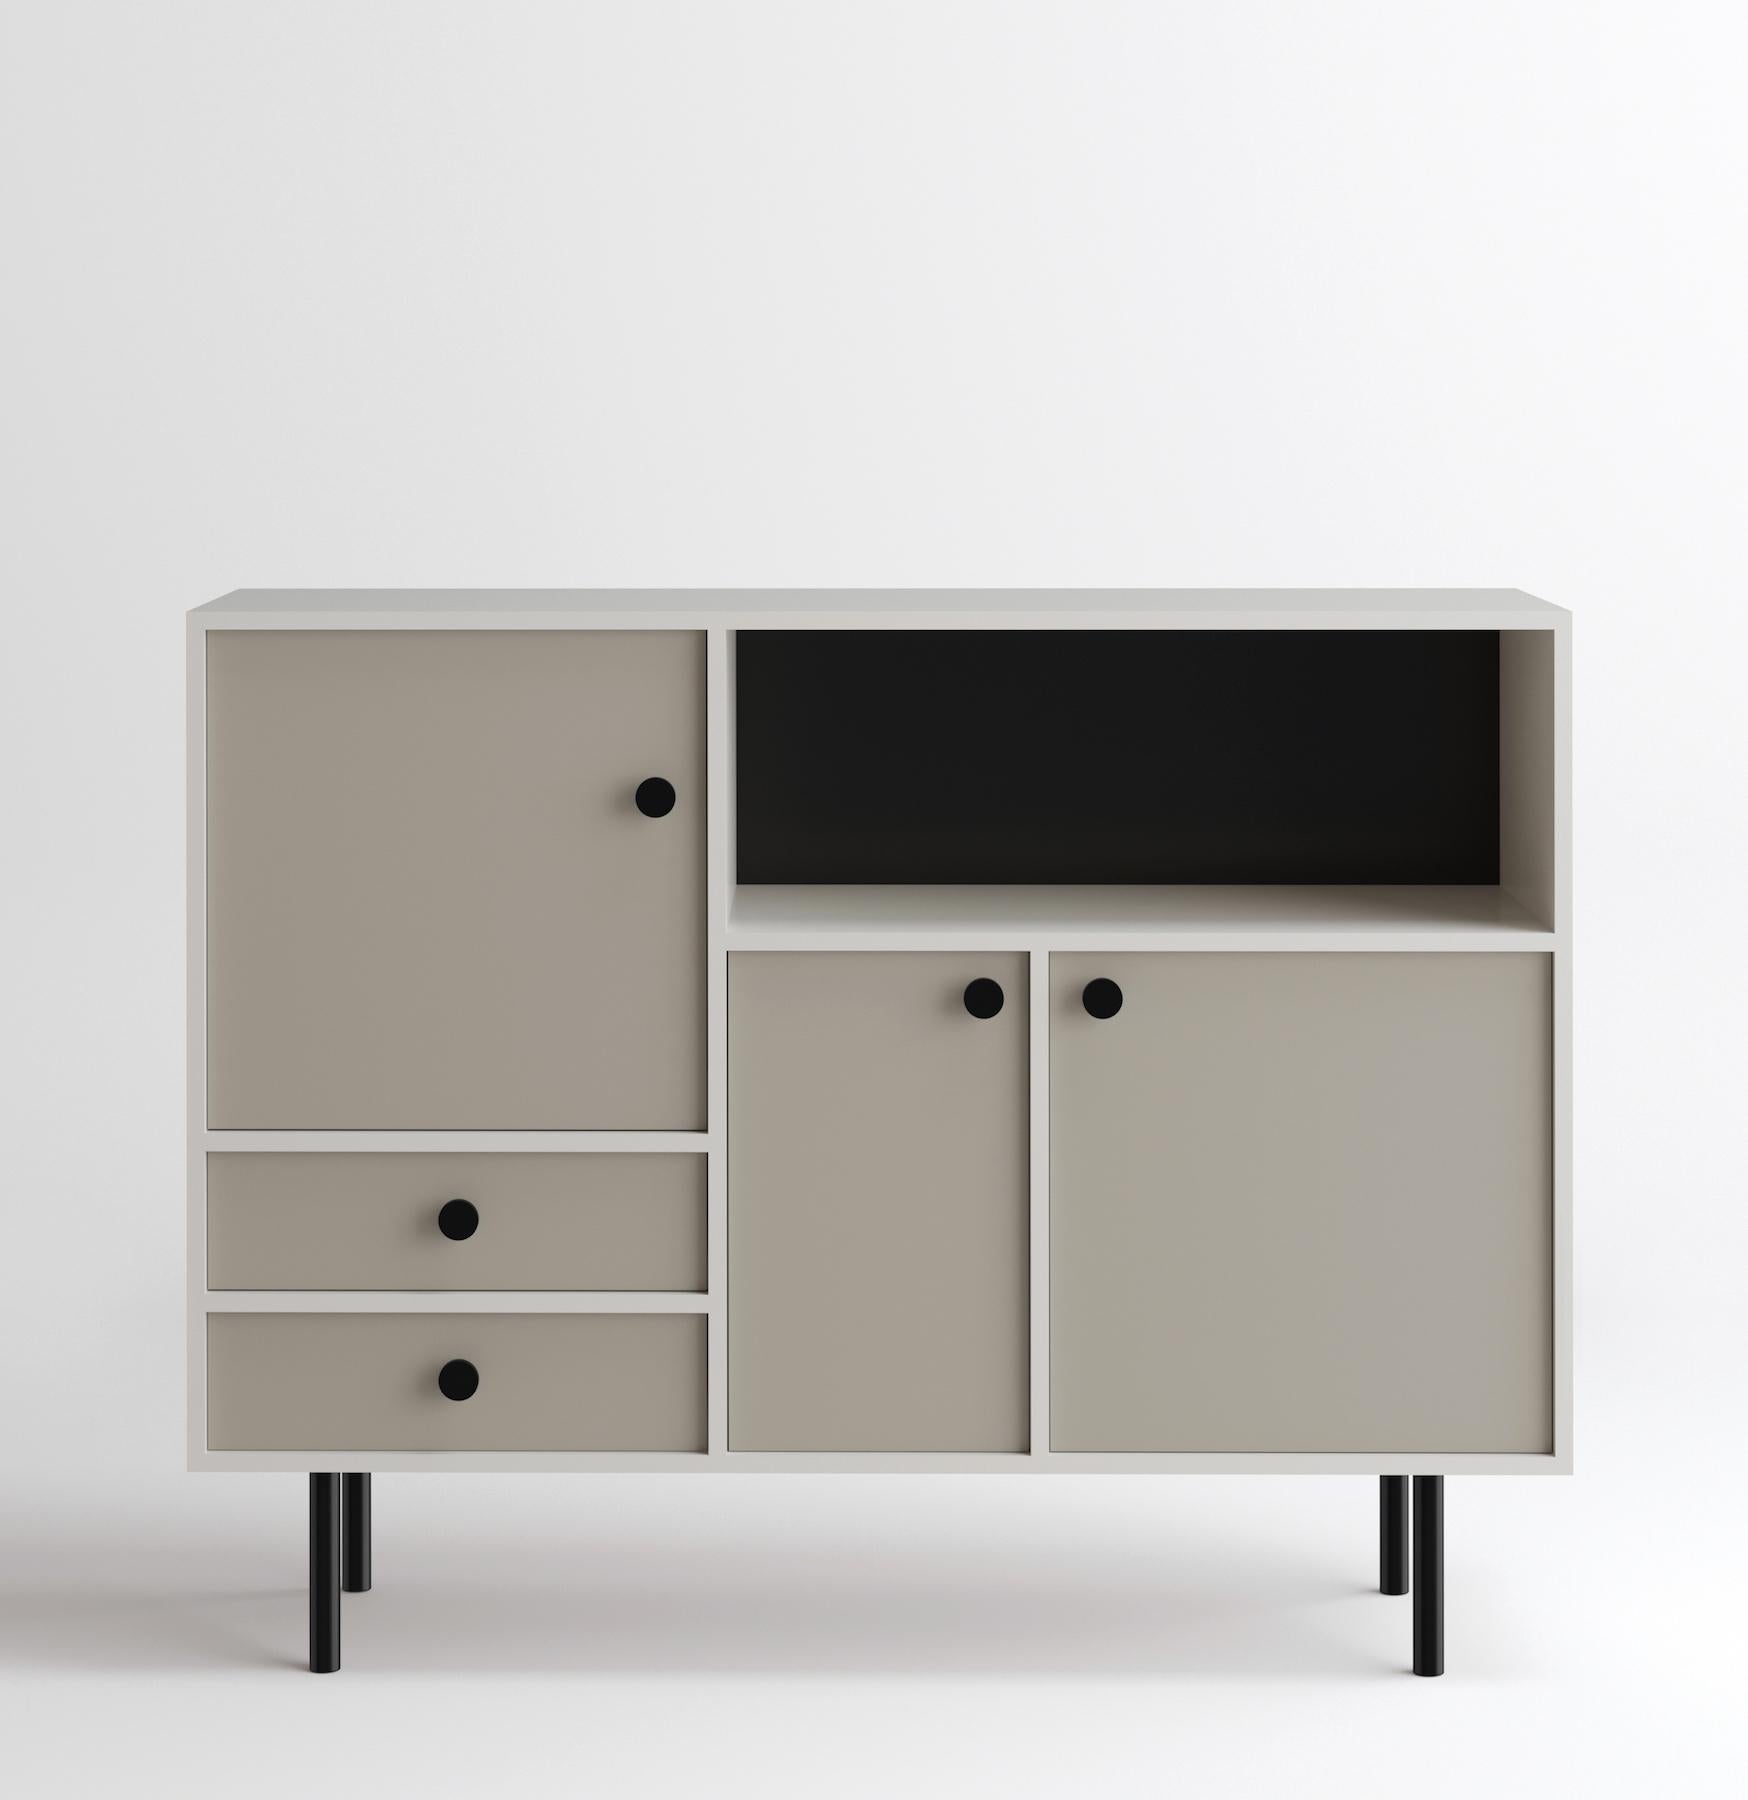 Geometric and Minimalist storage cabinet by Russian designer Dmitry Samygin. Inspired by Bauhaus style. 

High version (141cm)
Or
Low version (97cm)

Plywood
Measures: 97 x 146 x 39.5 cm

Choose your color!